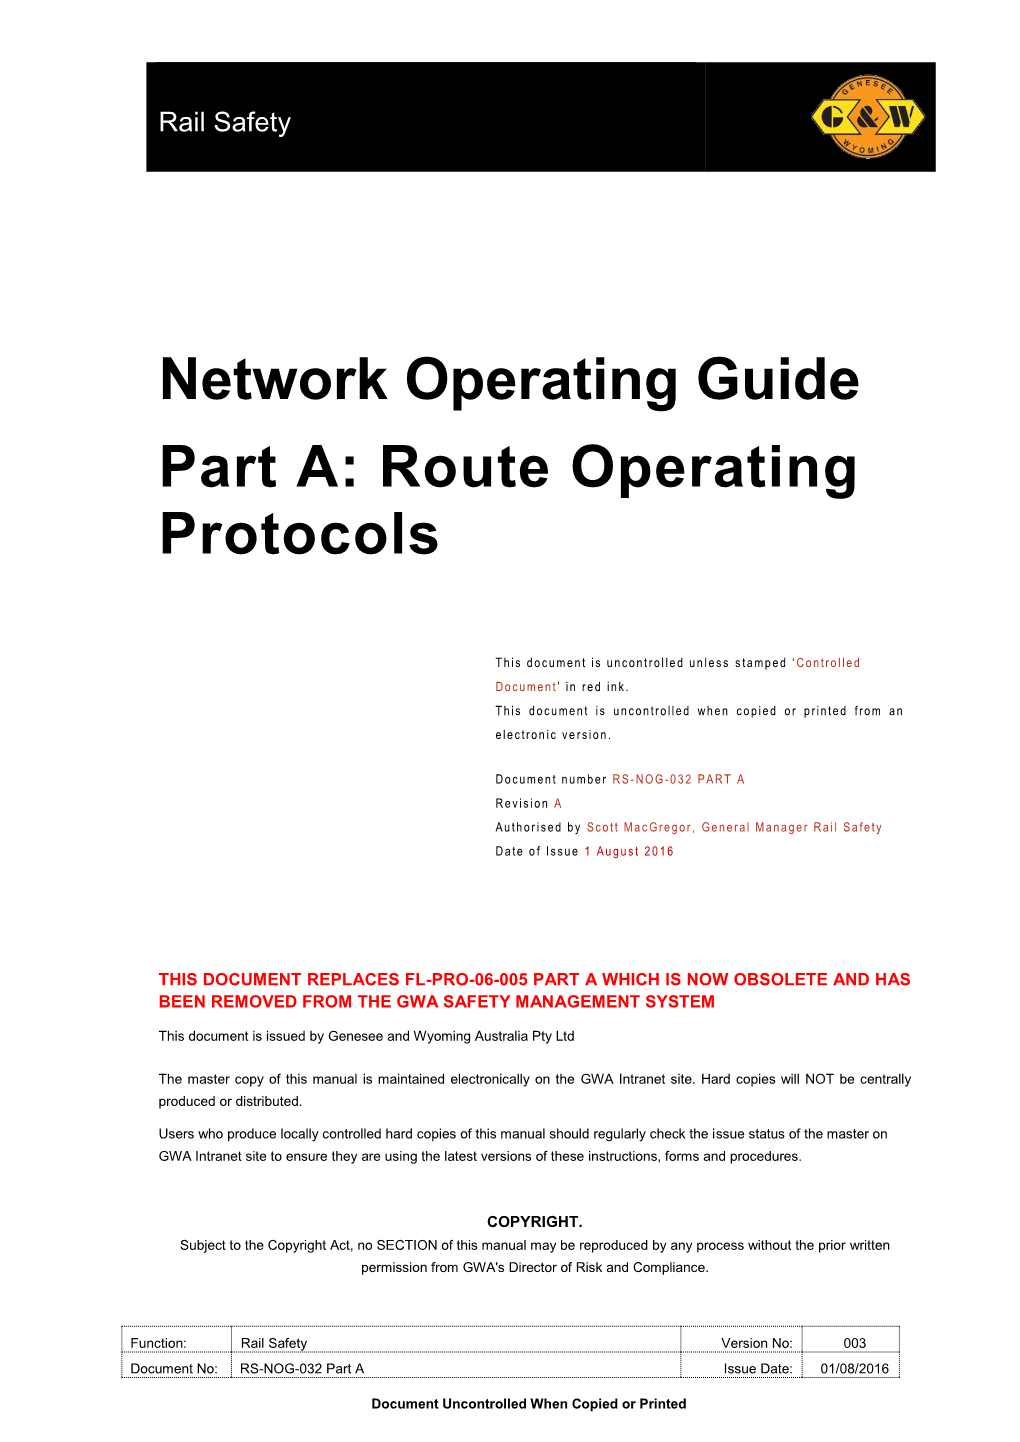 Network Operating Guide Part A: Route Operating Protocols